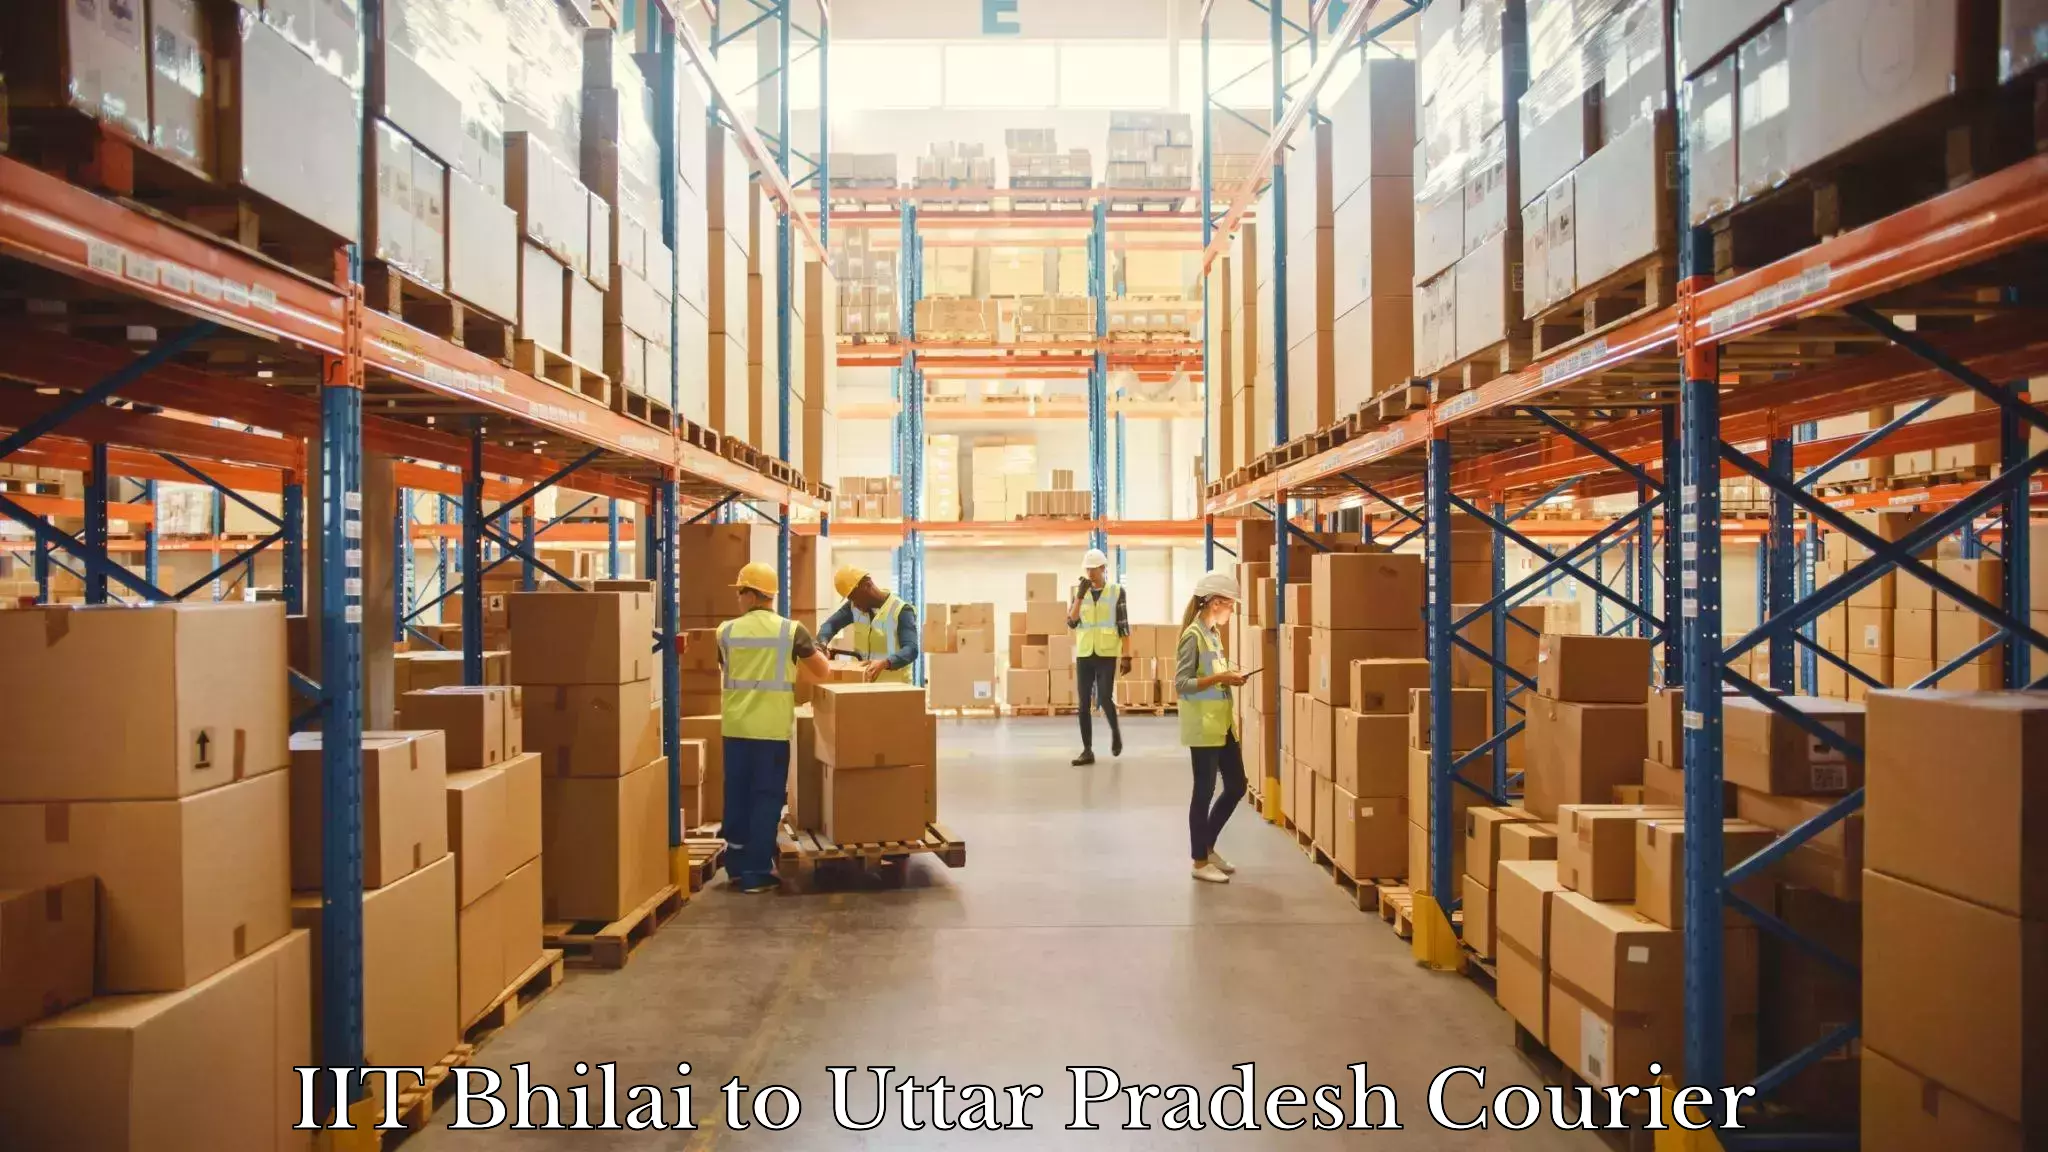 Parcel service for businesses IIT Bhilai to Anpara